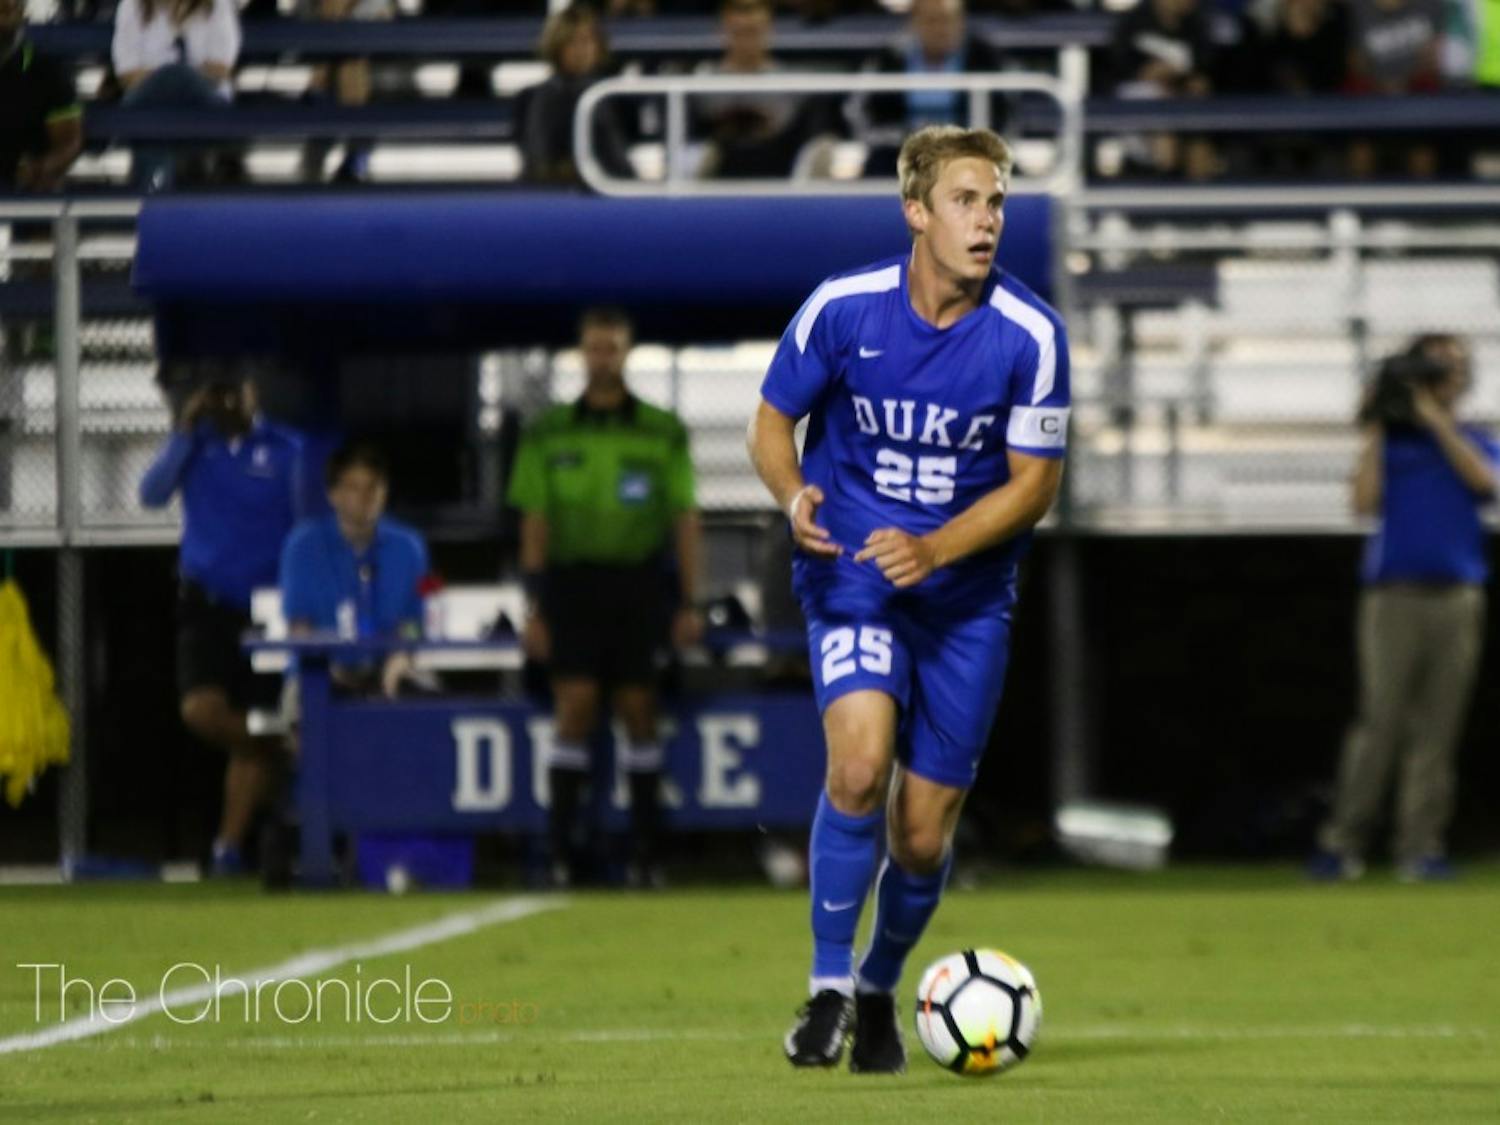 Cody Brinkman and the Blue Devil defense have given up just 11 goals in 11 games this year.